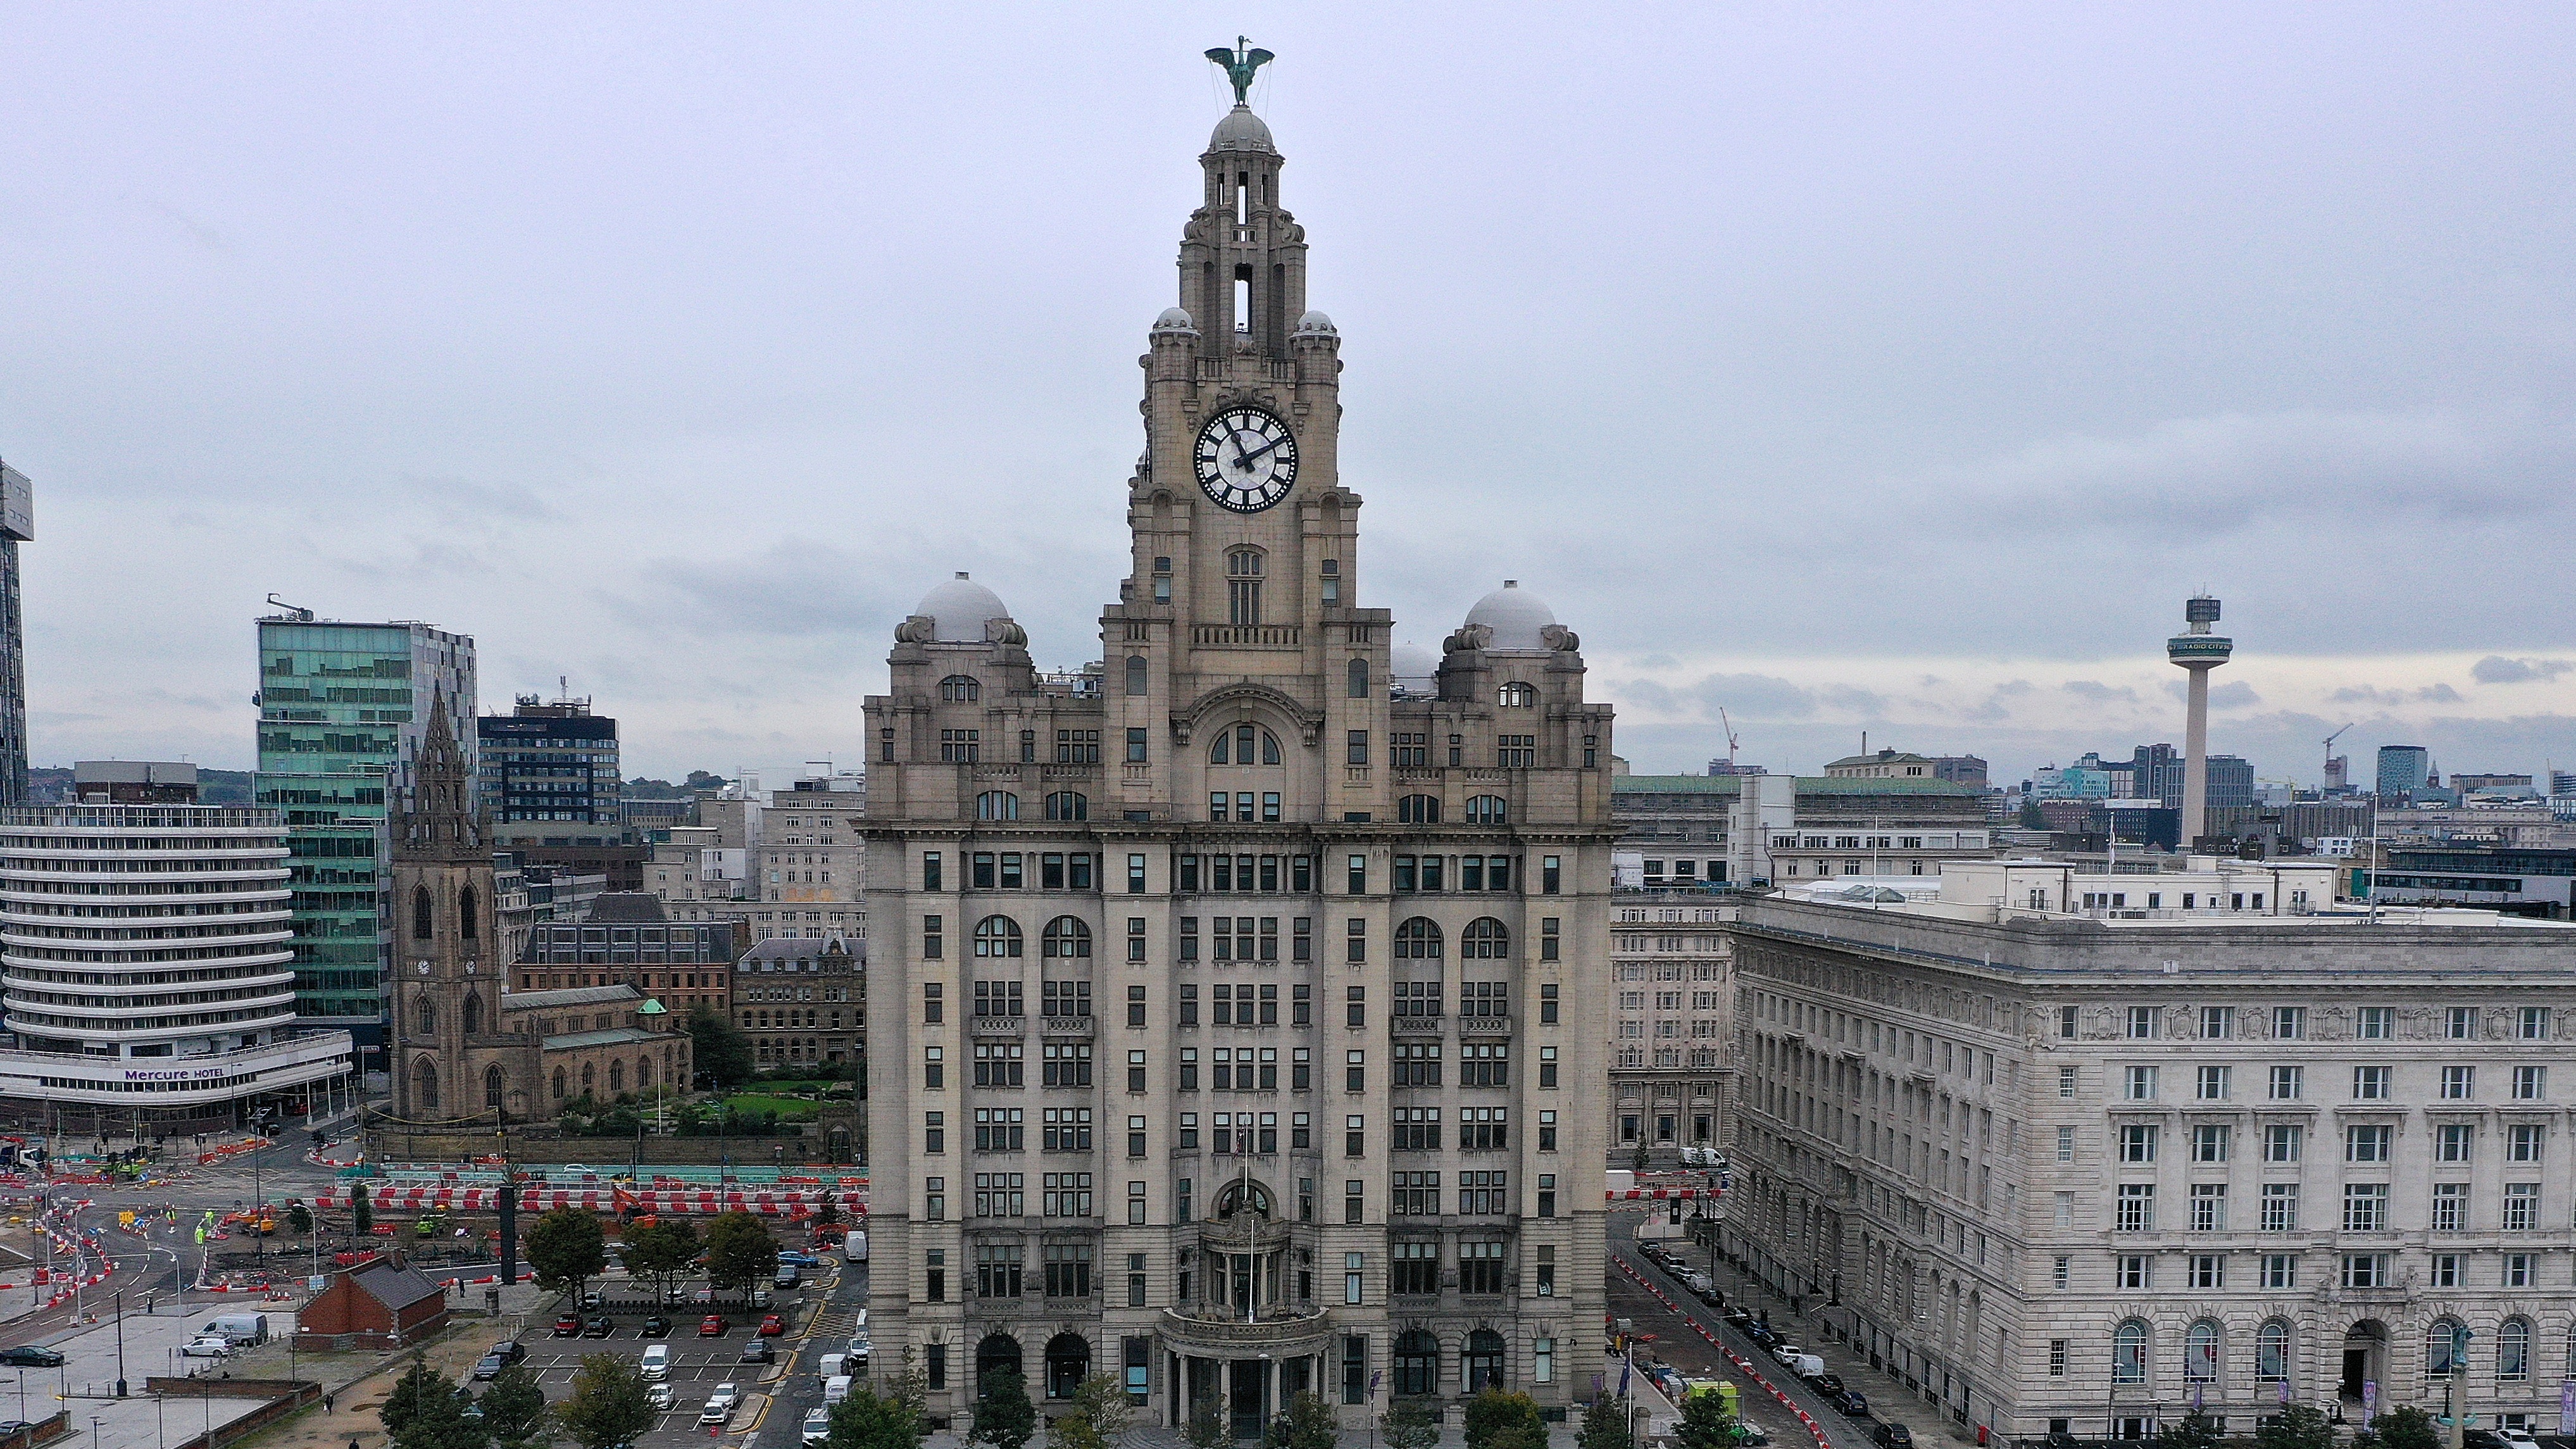 A view of the Royal Liver Building in Liverpool